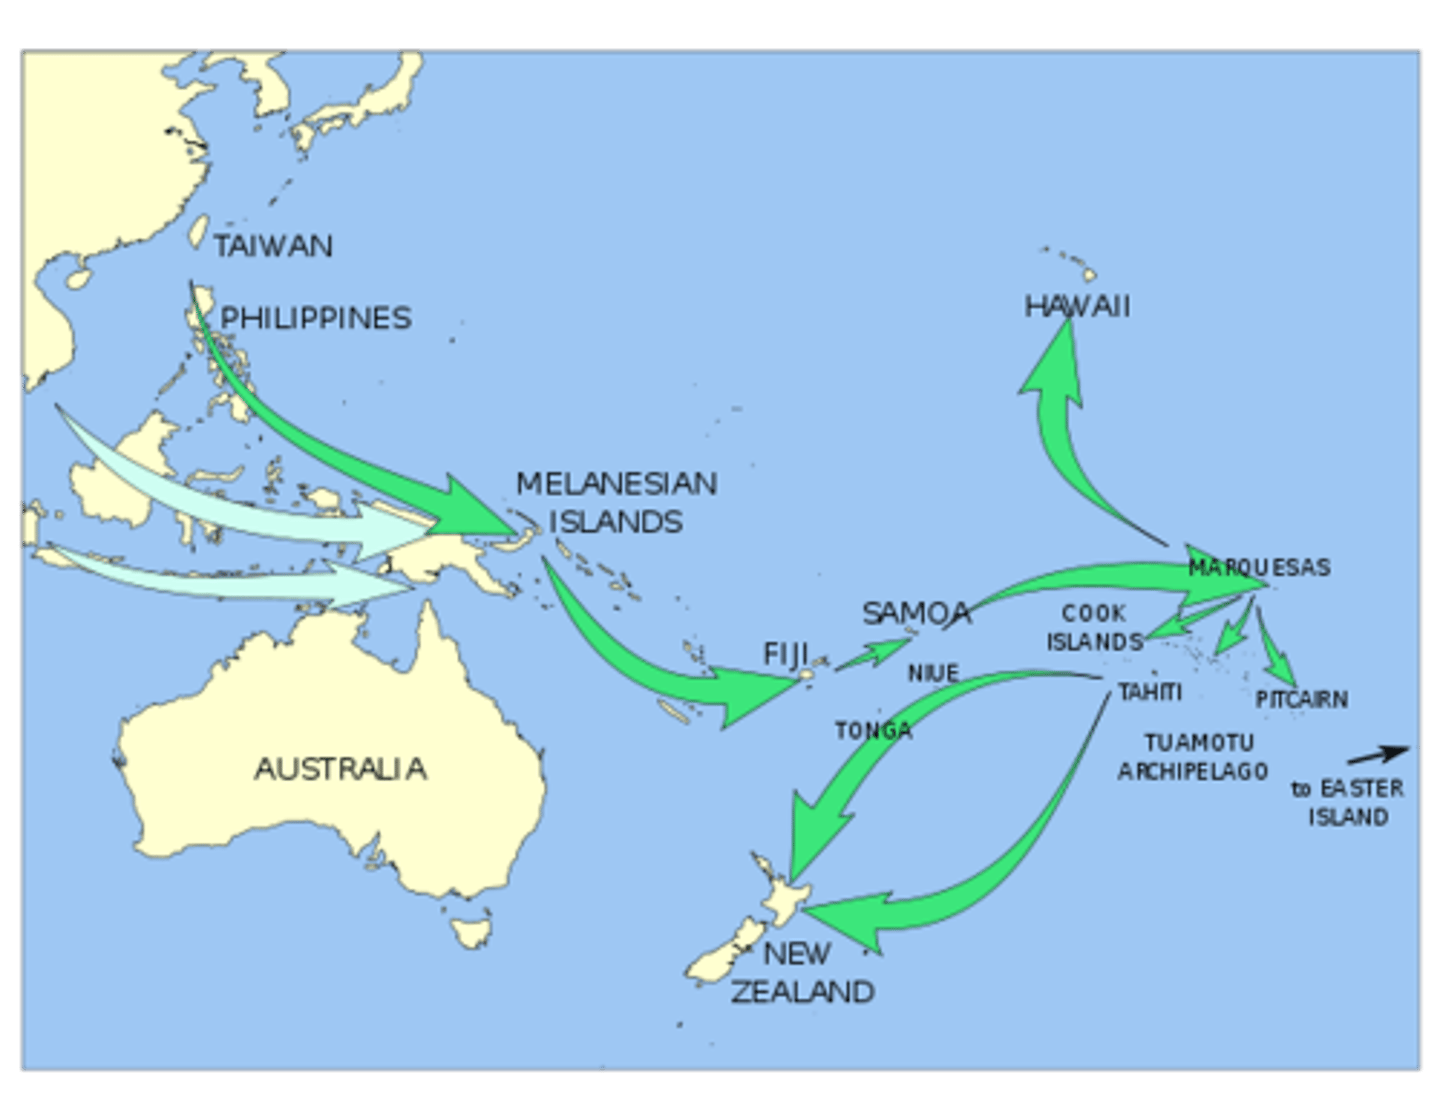 <p>The last phase of the great human migration that established a human presence in every habitable region of the earth. Austronesian-speaking people settled the Pacific island and Madagascar in a series of seaborne migrations that began around 3,500 years ago</p>